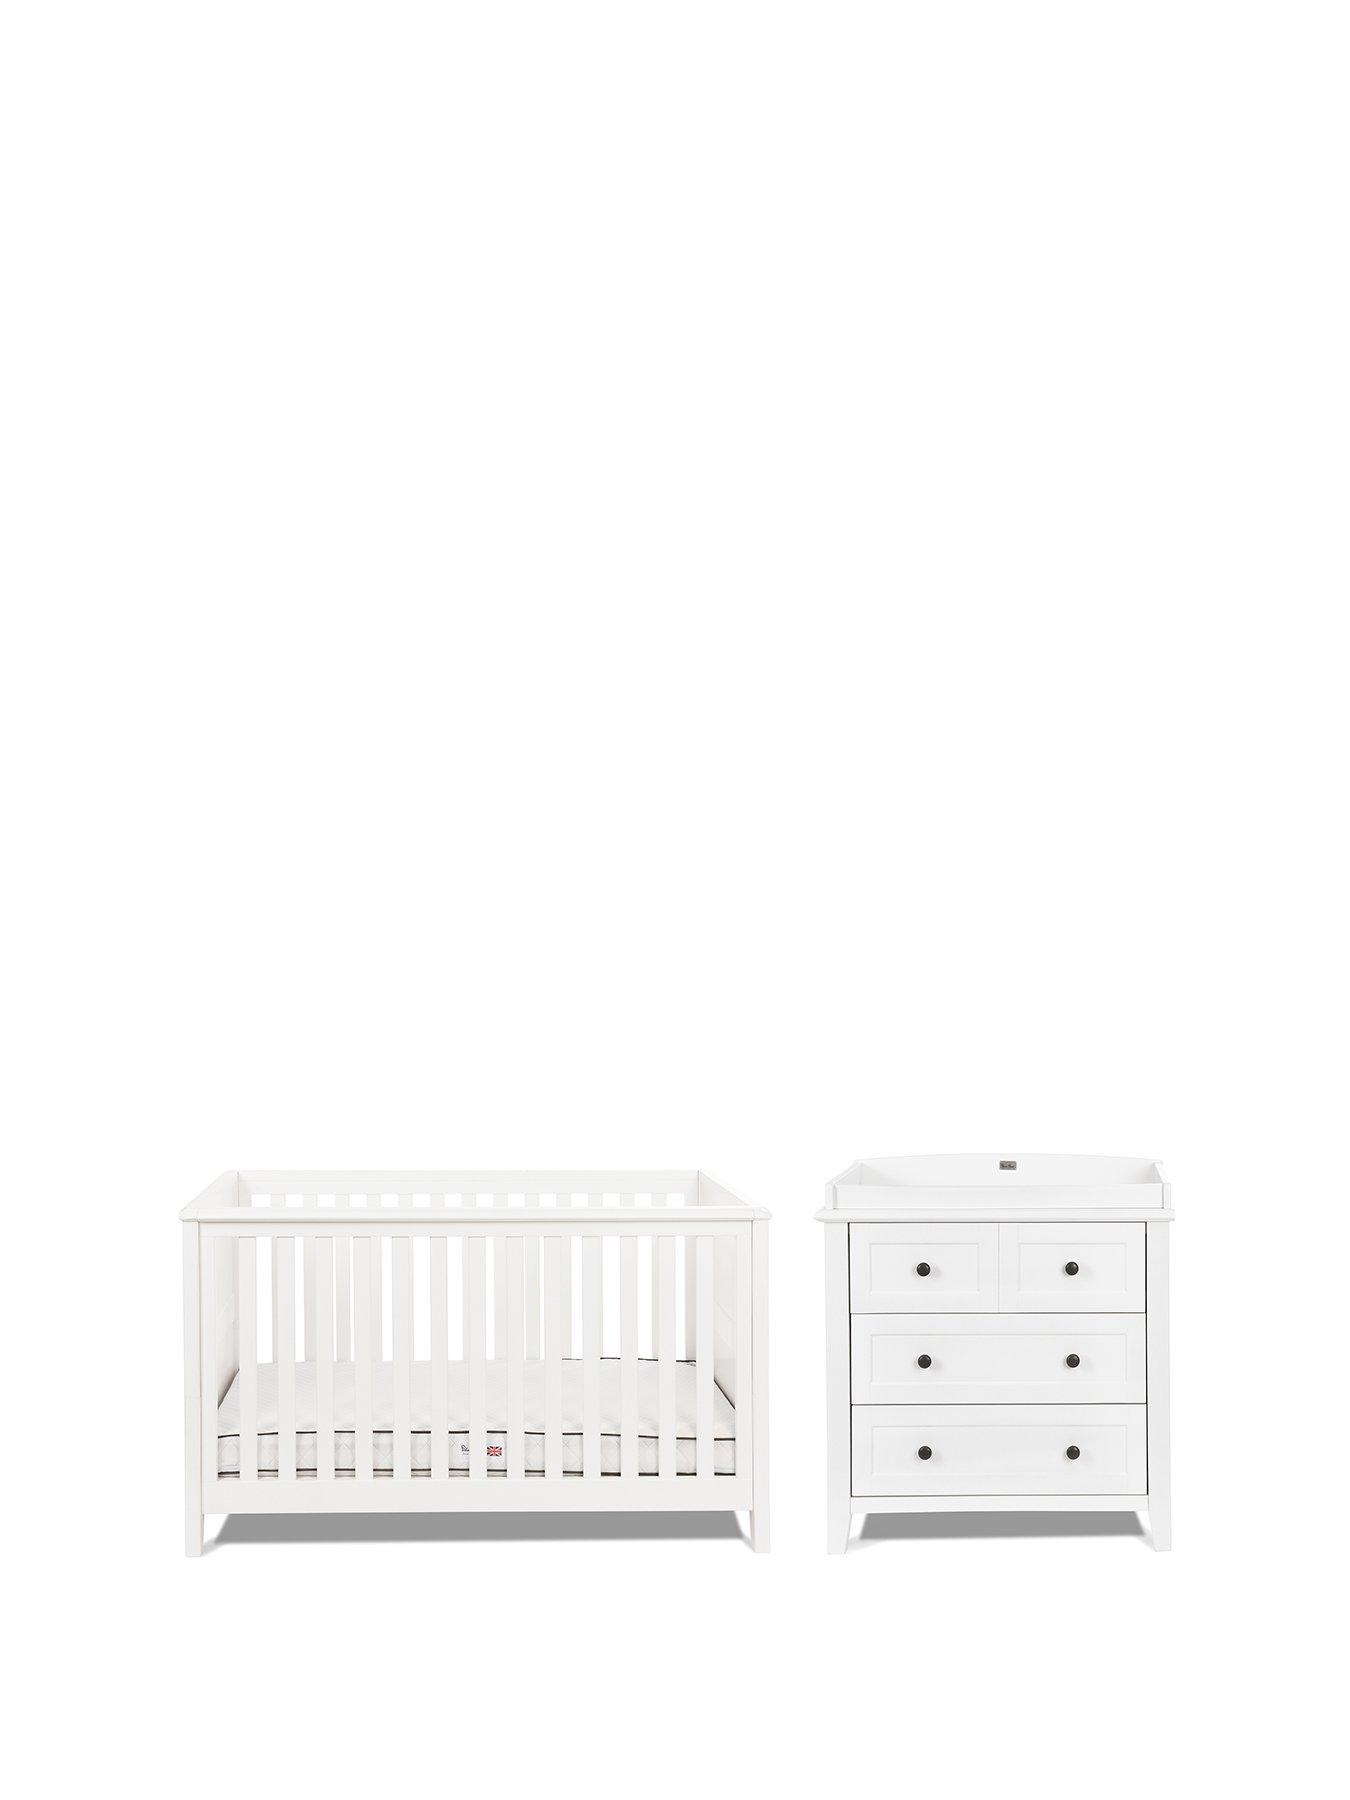 silver cross new england cot bed